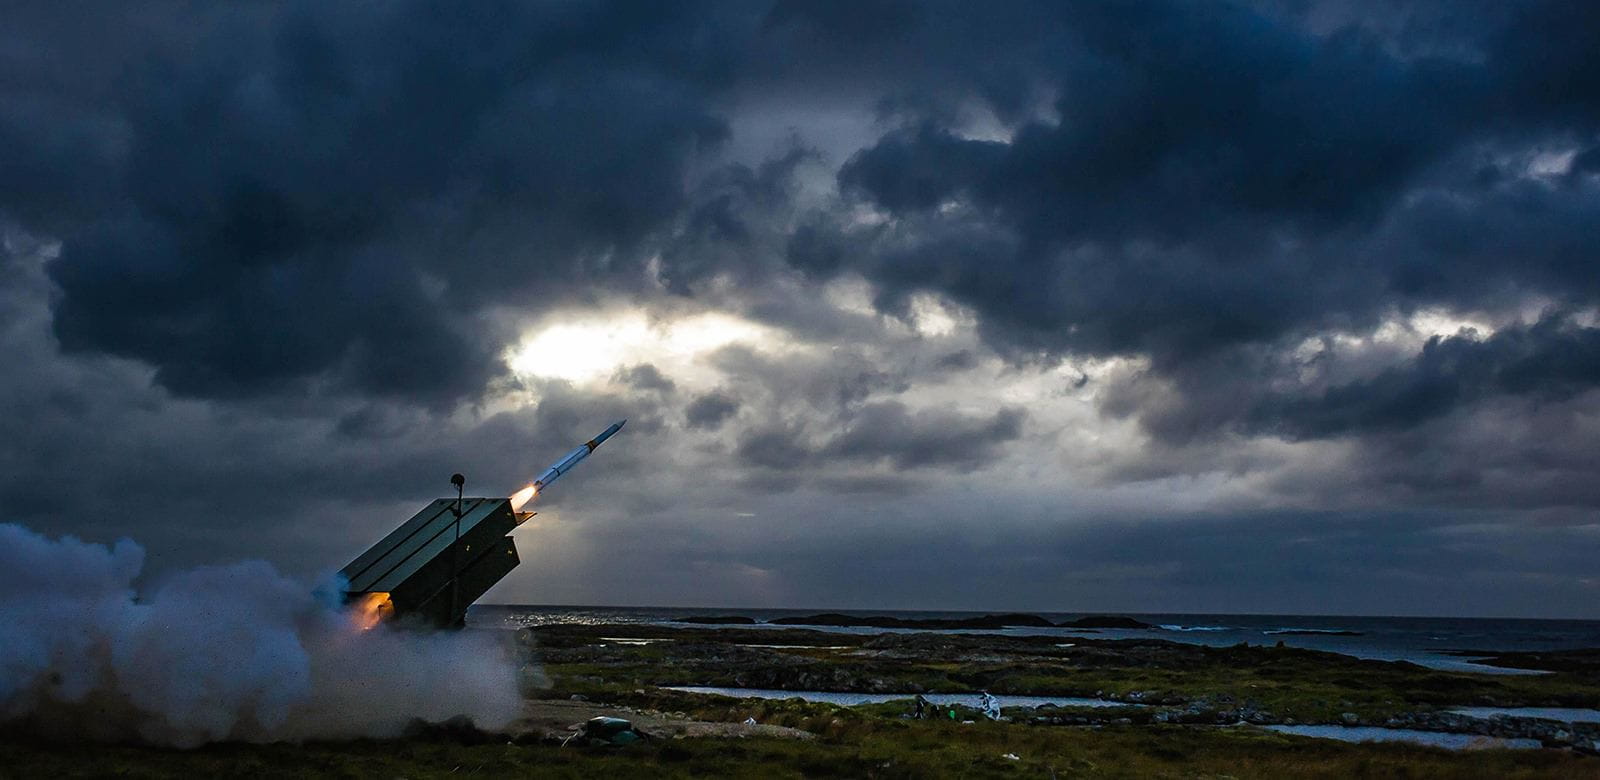 Norway fired an AMRAAM-Extended Range missile from a NASAMS high mobility launcher during an international flight test. The missile, originally developed for the U.S. military, is now sold to dozens of foreign military allies.